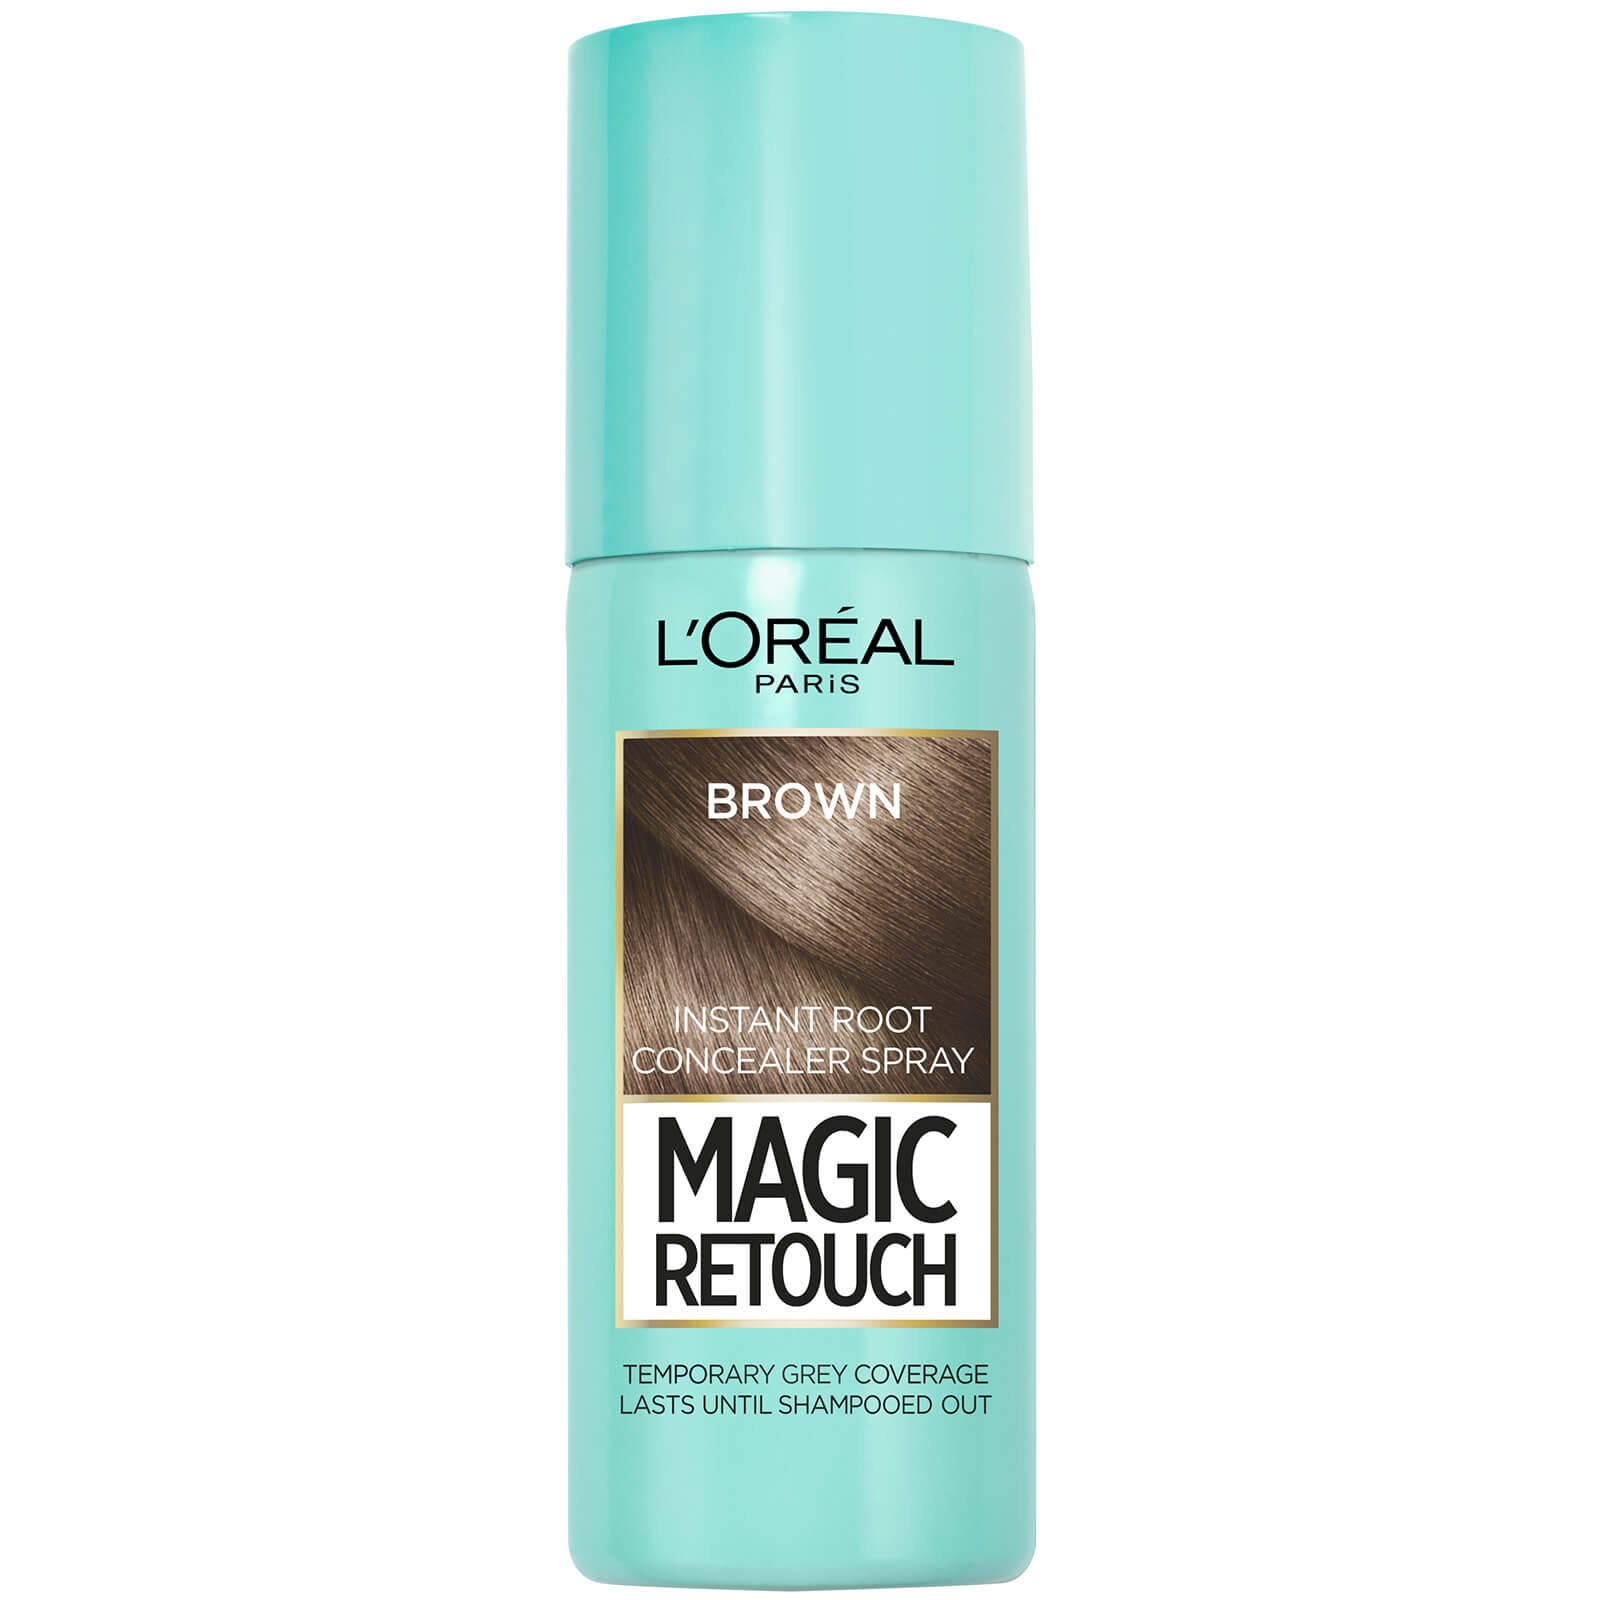 L'Oreal Magic Retouch Temporary Instant Grey Root Concealer Spray - Brown, 75ml